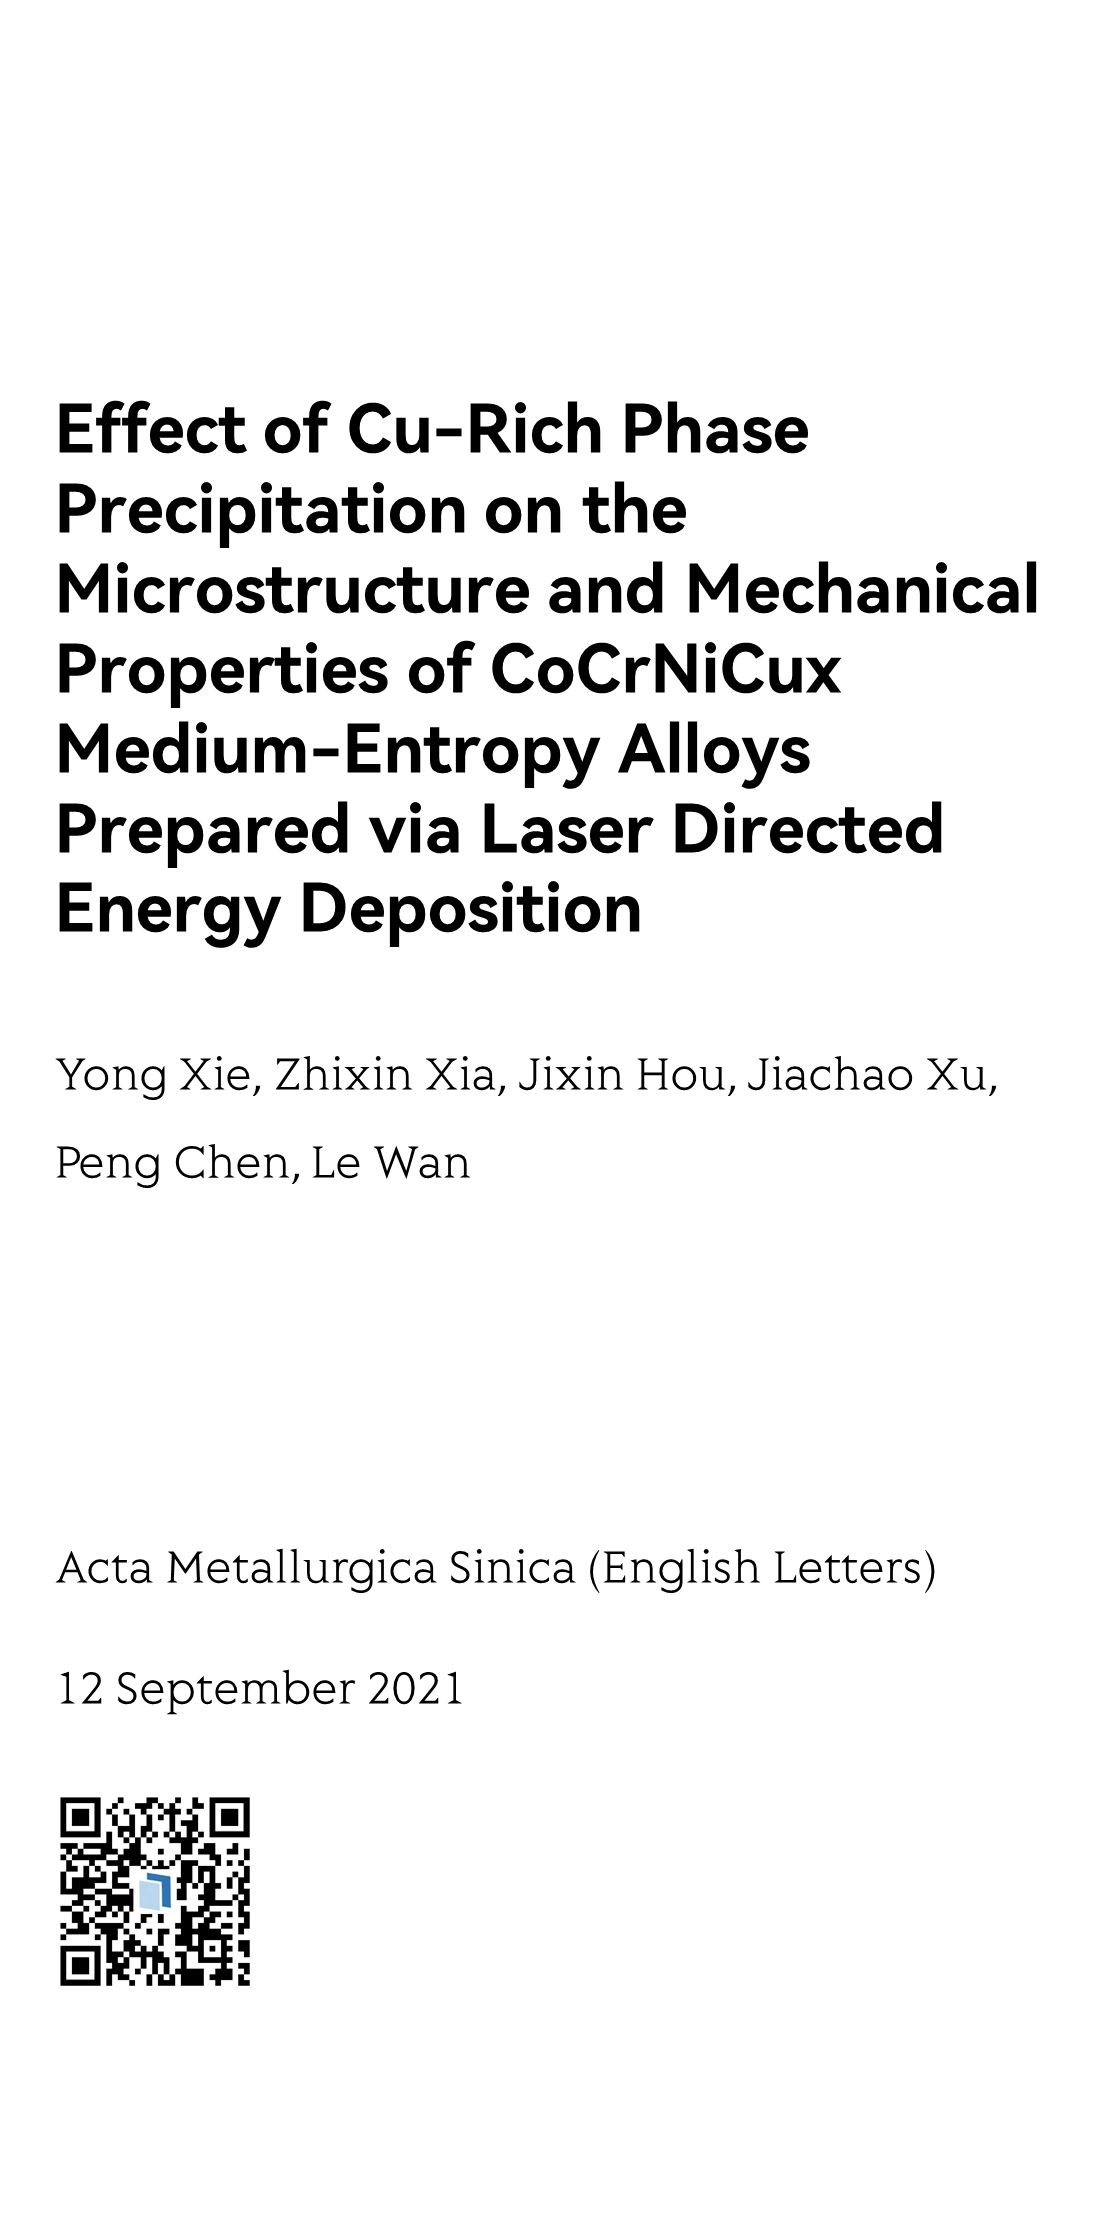 Effect of Cu-Rich Phase Precipitation on the Microstructure and Mechanical Properties of CoCrNiCux Medium-Entropy Alloys Prepared via Laser Directed Energy Deposition_1